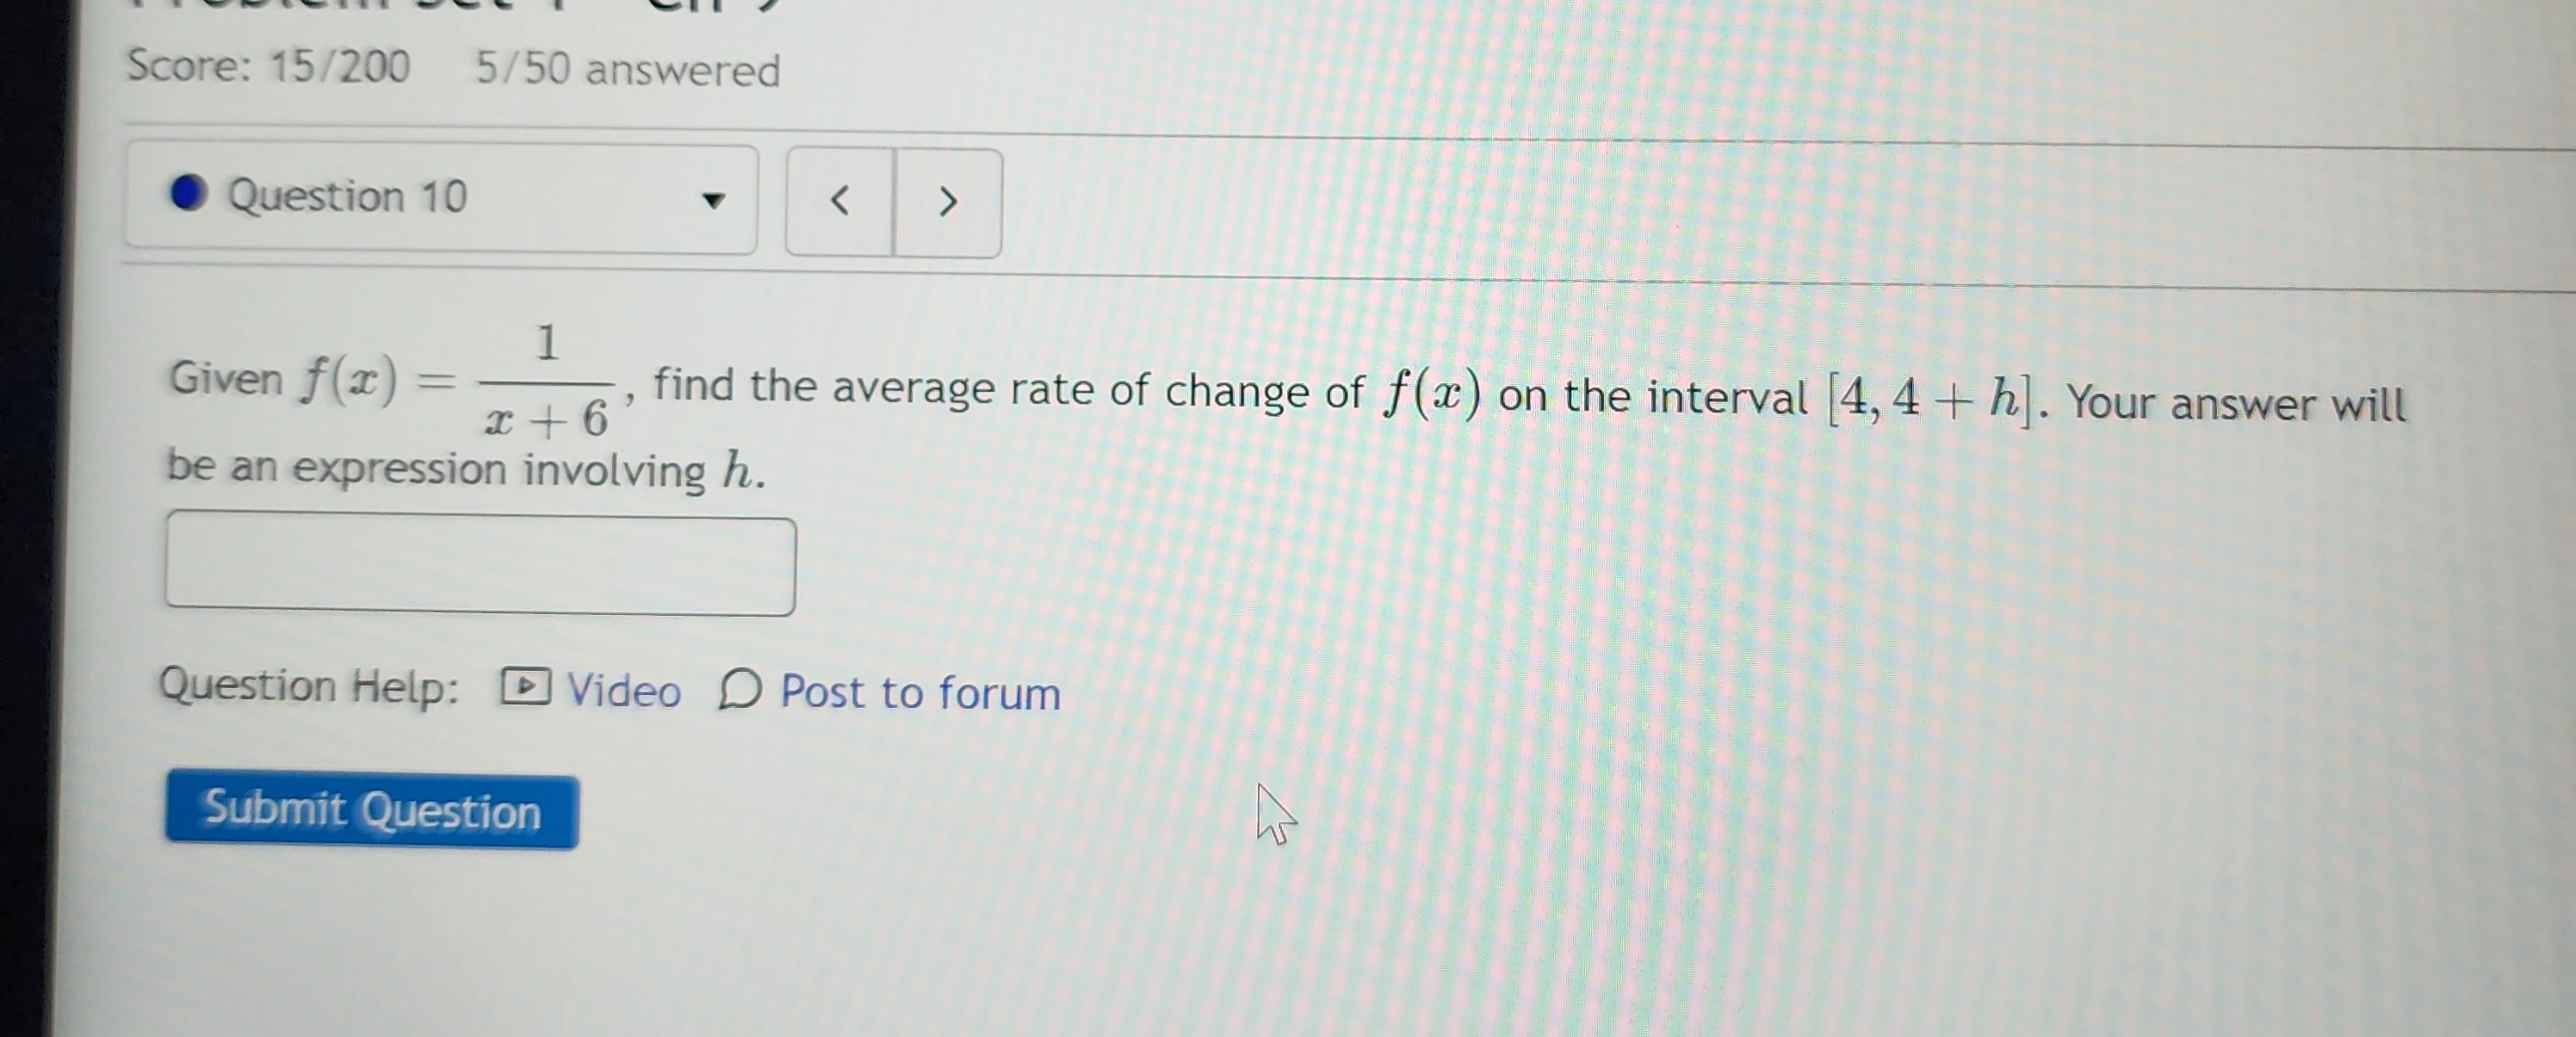 Given \( f(x)=\frac{1}{x+6} \), find the average rate of change of \( f(x) \) on the interval \( [4,4+h] \). Your answer will